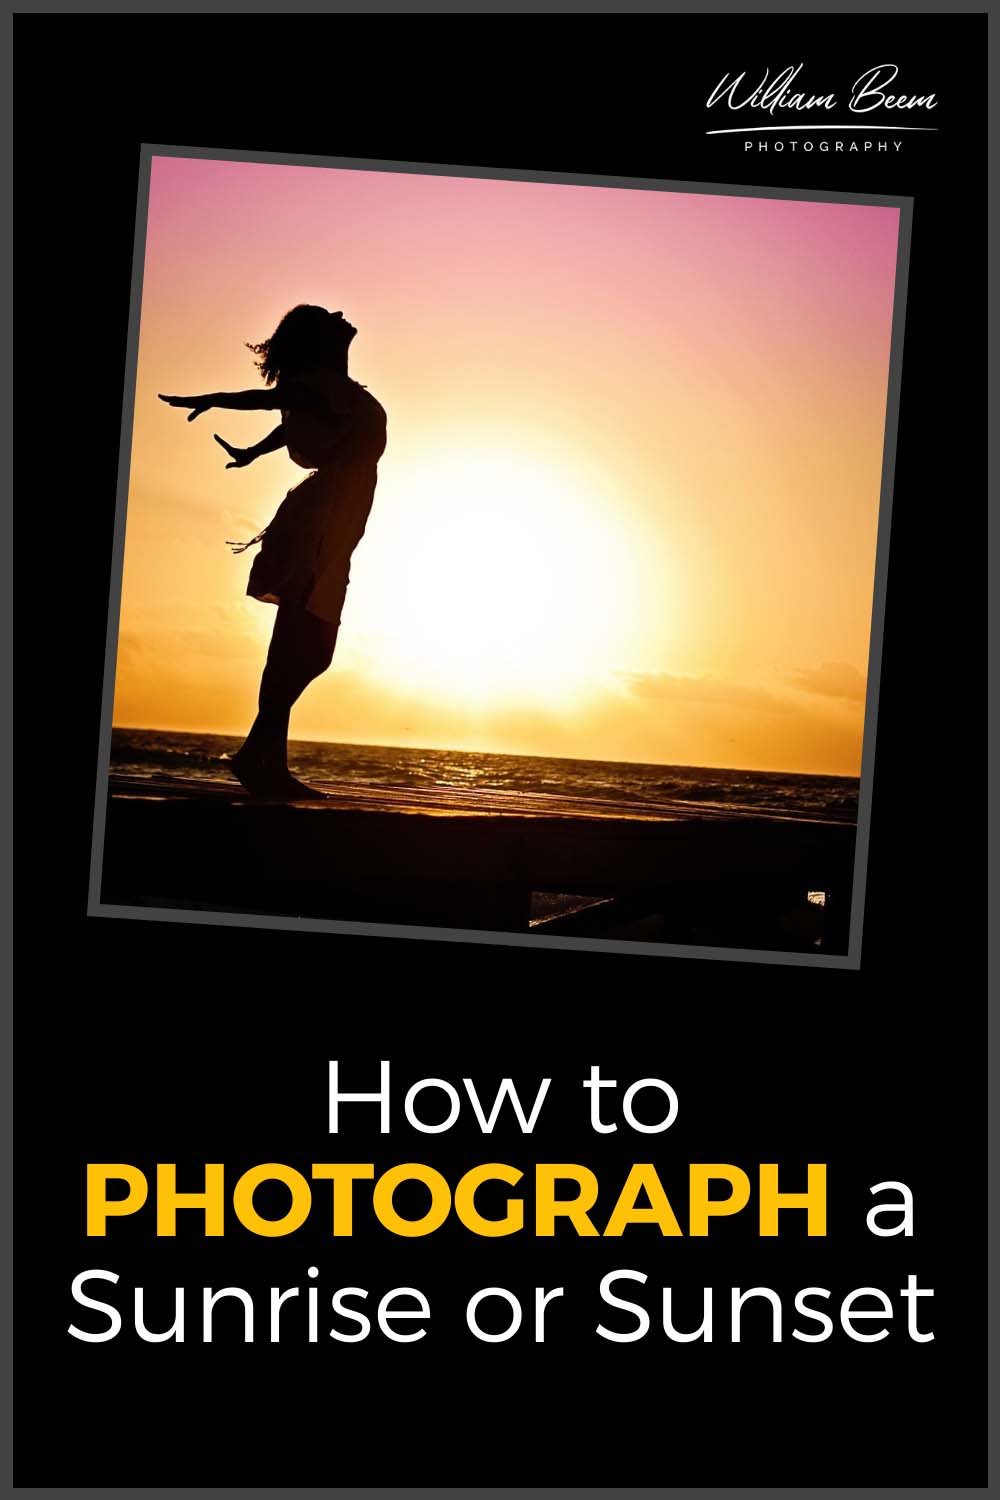 How to PHOTOGRAPH a Sunrise or Sunset